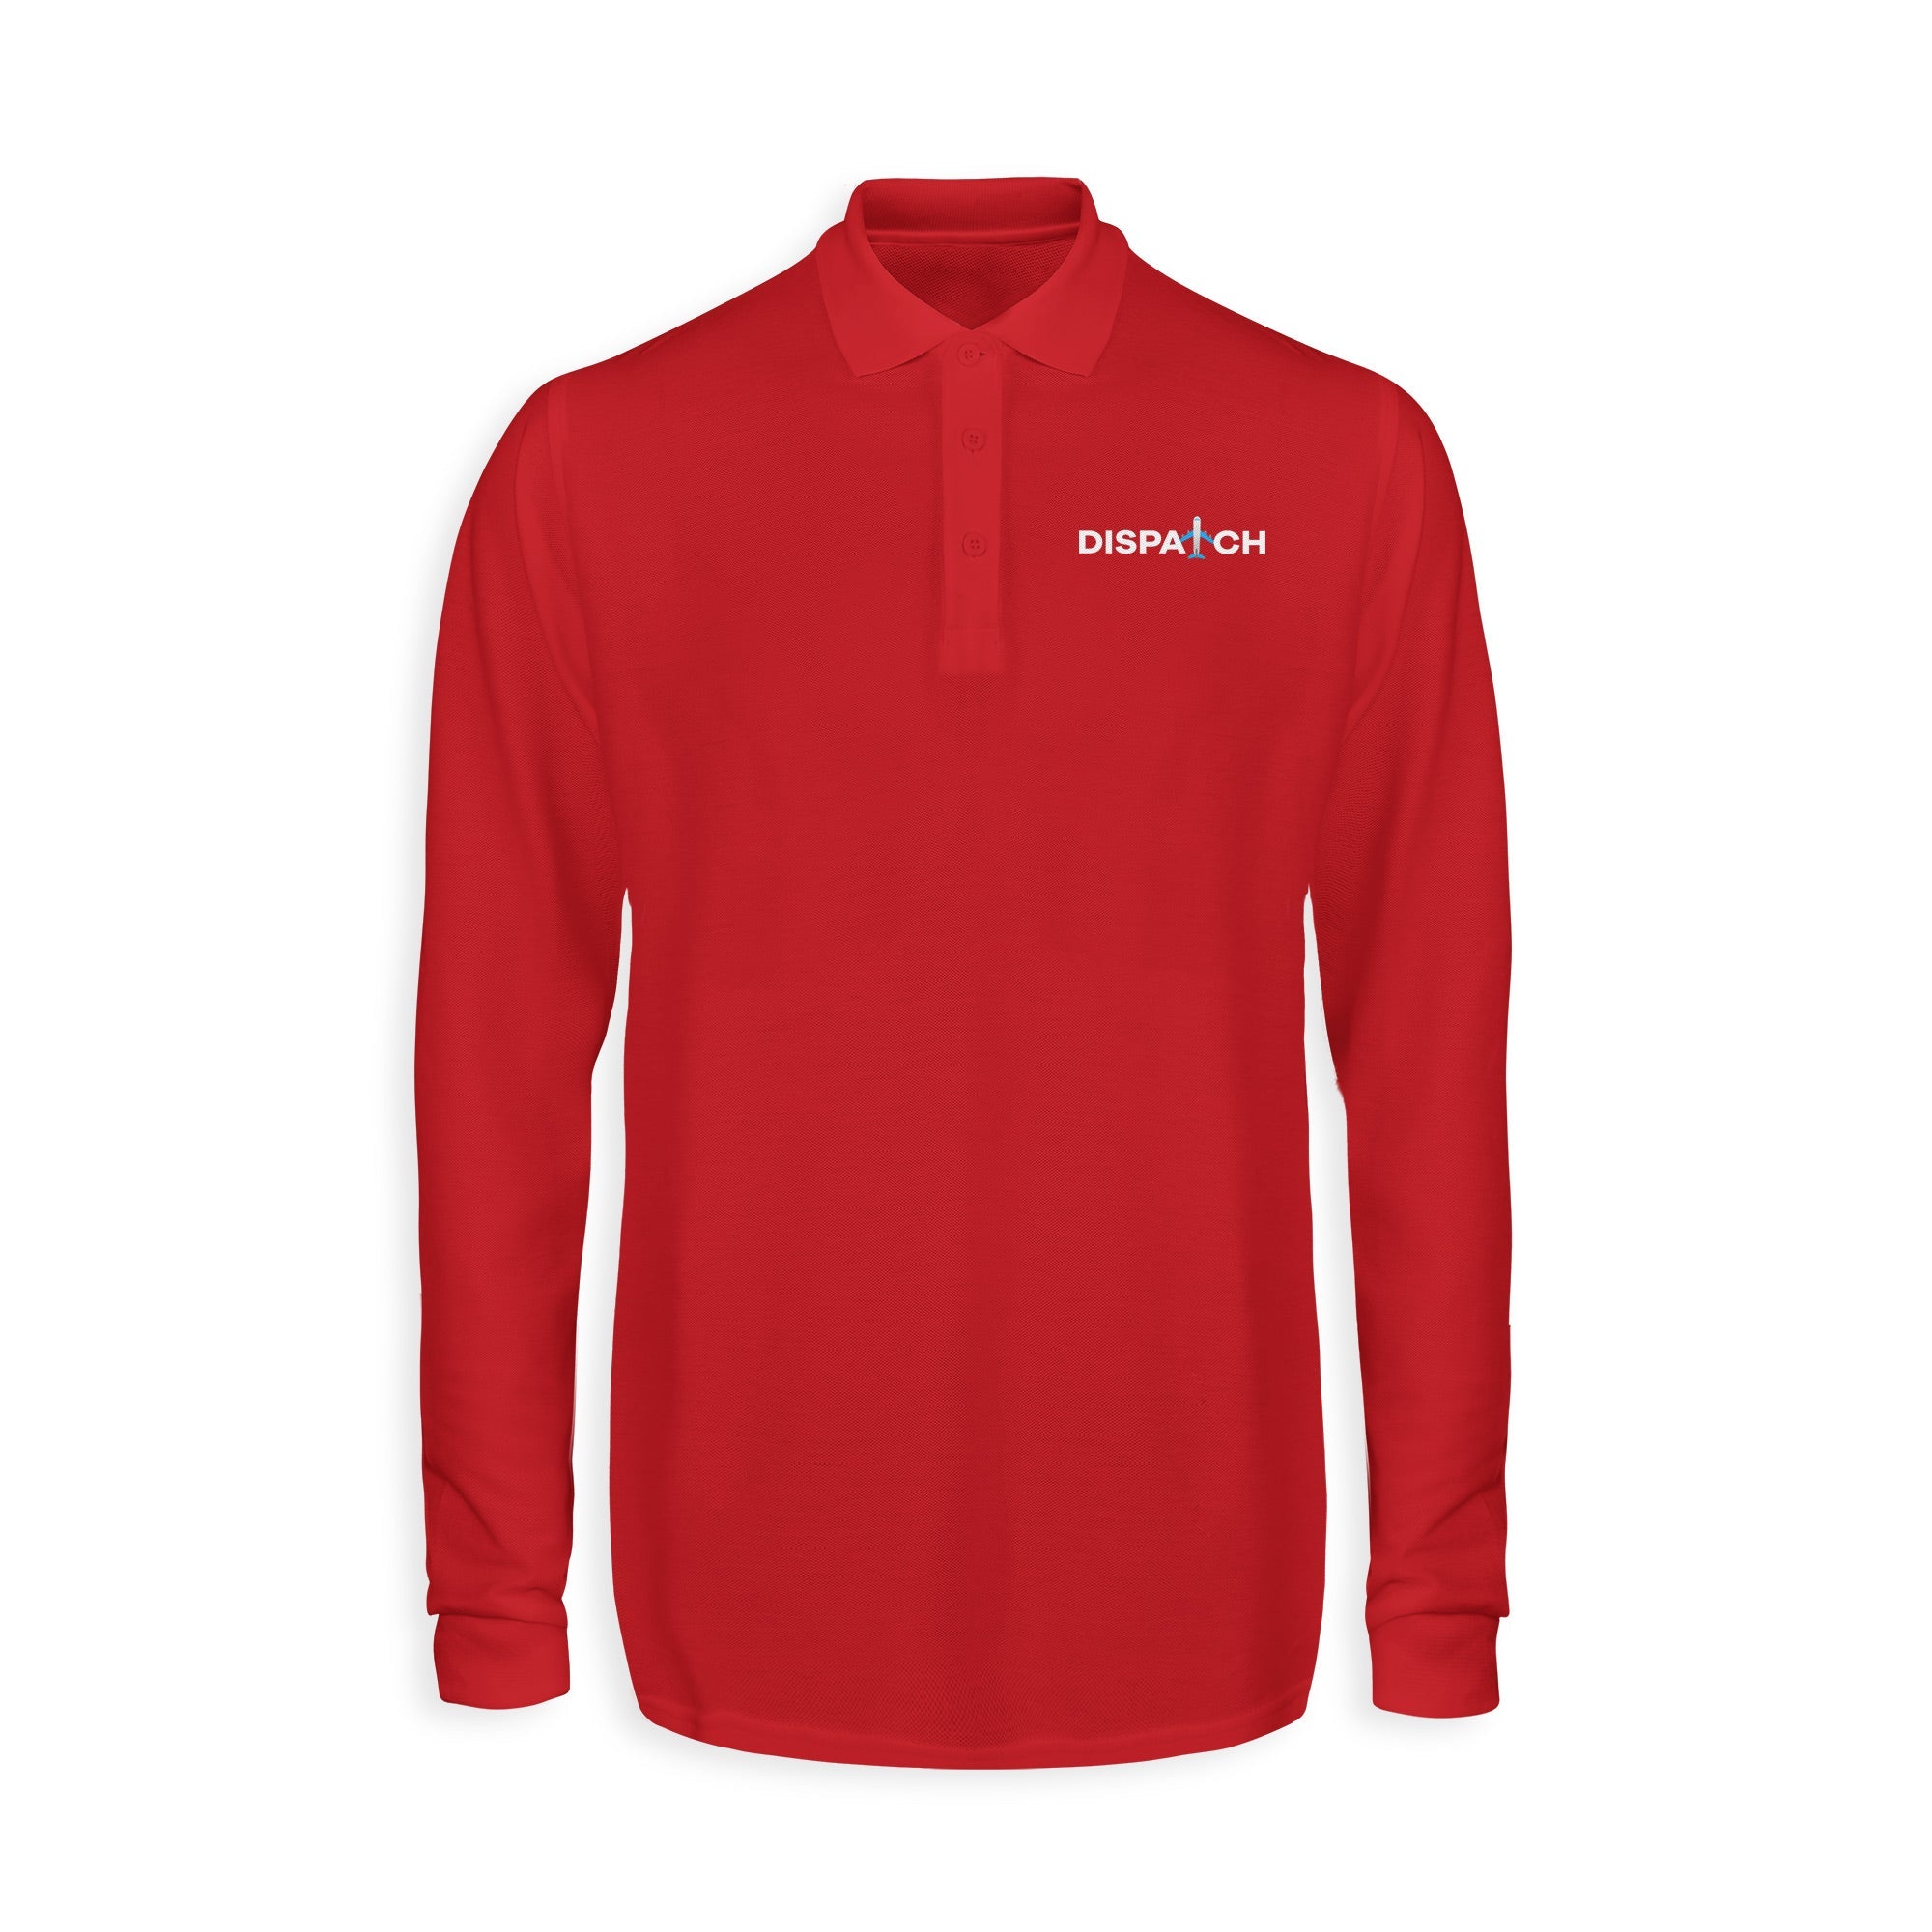 Dispatch Designed Long Sleeve Polo T-Shirts